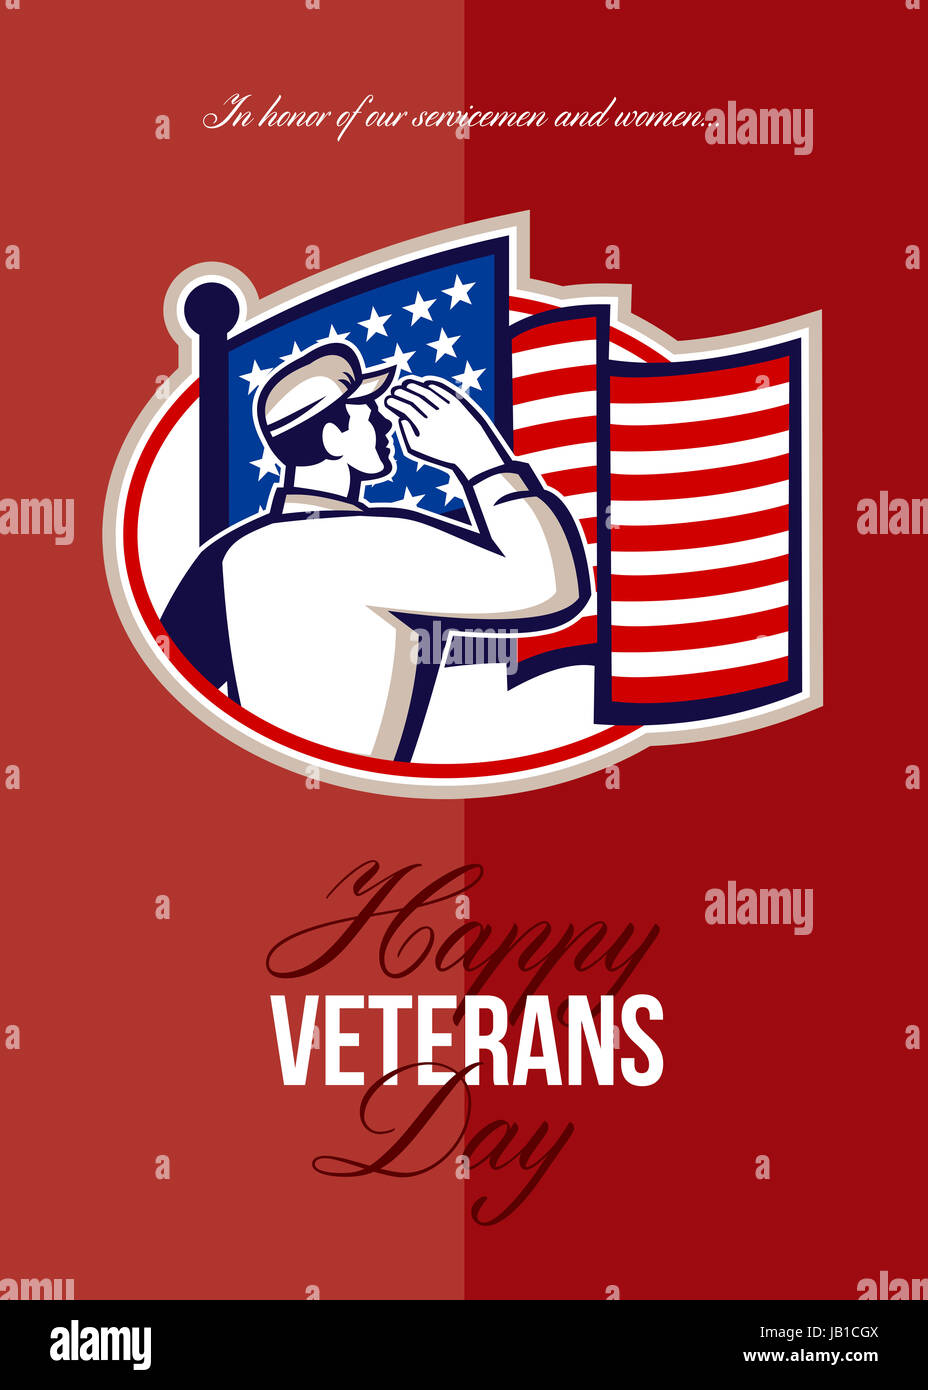 Greeting card poster showing illustration of an American soldier serviceman saluting USA stars and stripes flag viewed from rear set inside oval done in retro style with words Happy Veterans Day in honor of our servicemen and woman. Stock Photo